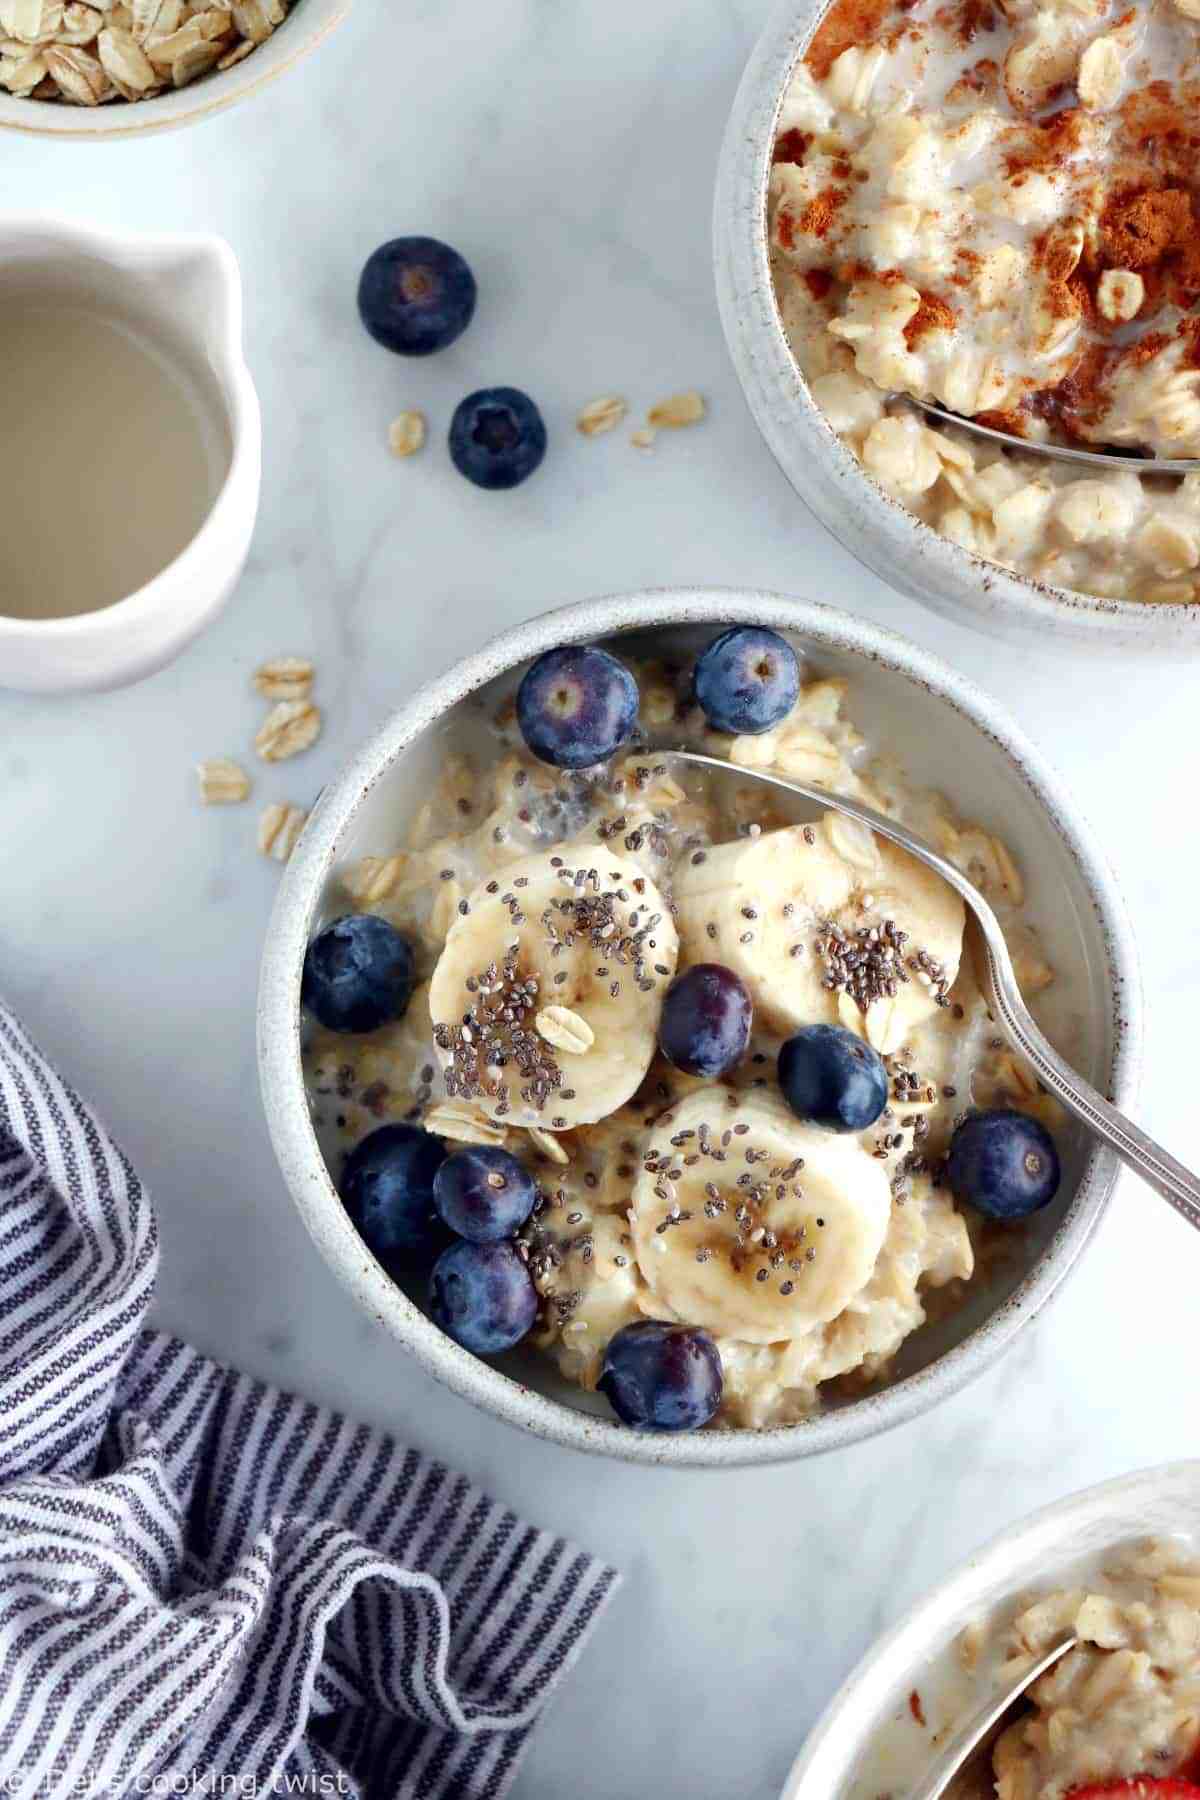 Which is the best breakfast for weight loss?